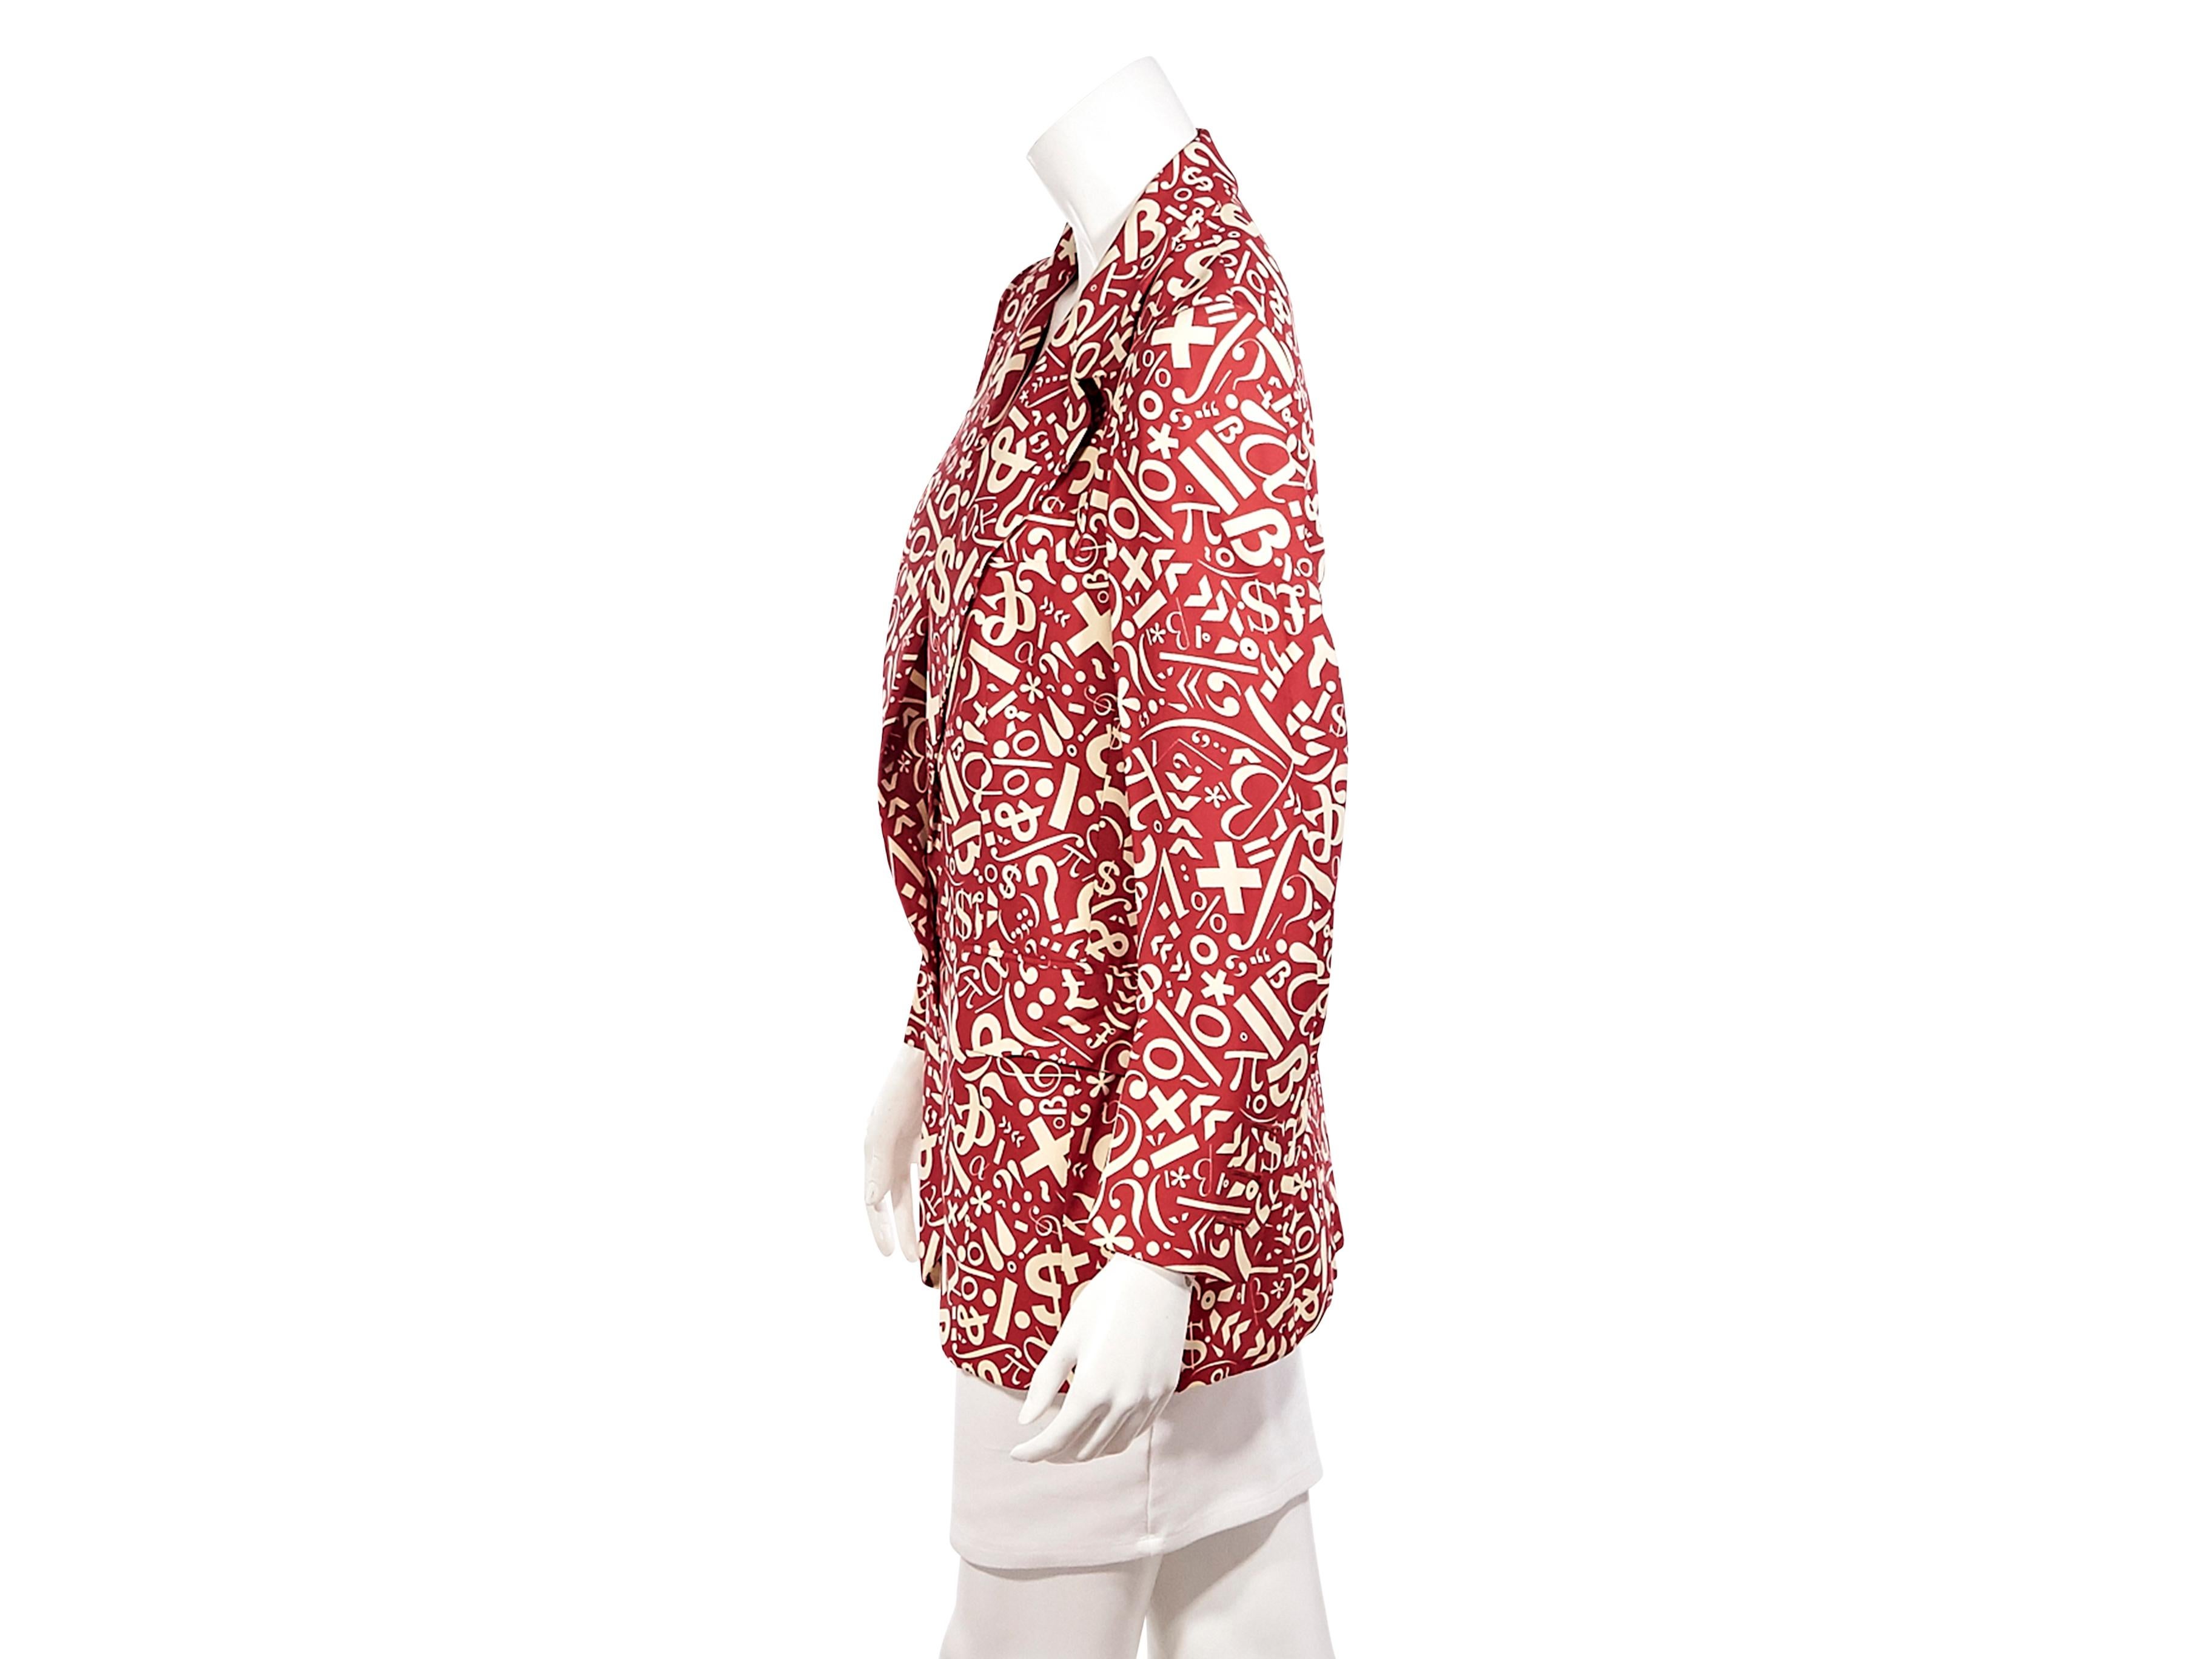 Product details:  Vintage red and white silk printed blazer by Cheap and Chic by Moschino.  Peak lapels. Long sleeves. Gold-tone embossed single-button closure. Dual waist flap pockets. Back center hem vent. Roll the sleeves up over a T-shirt. Label